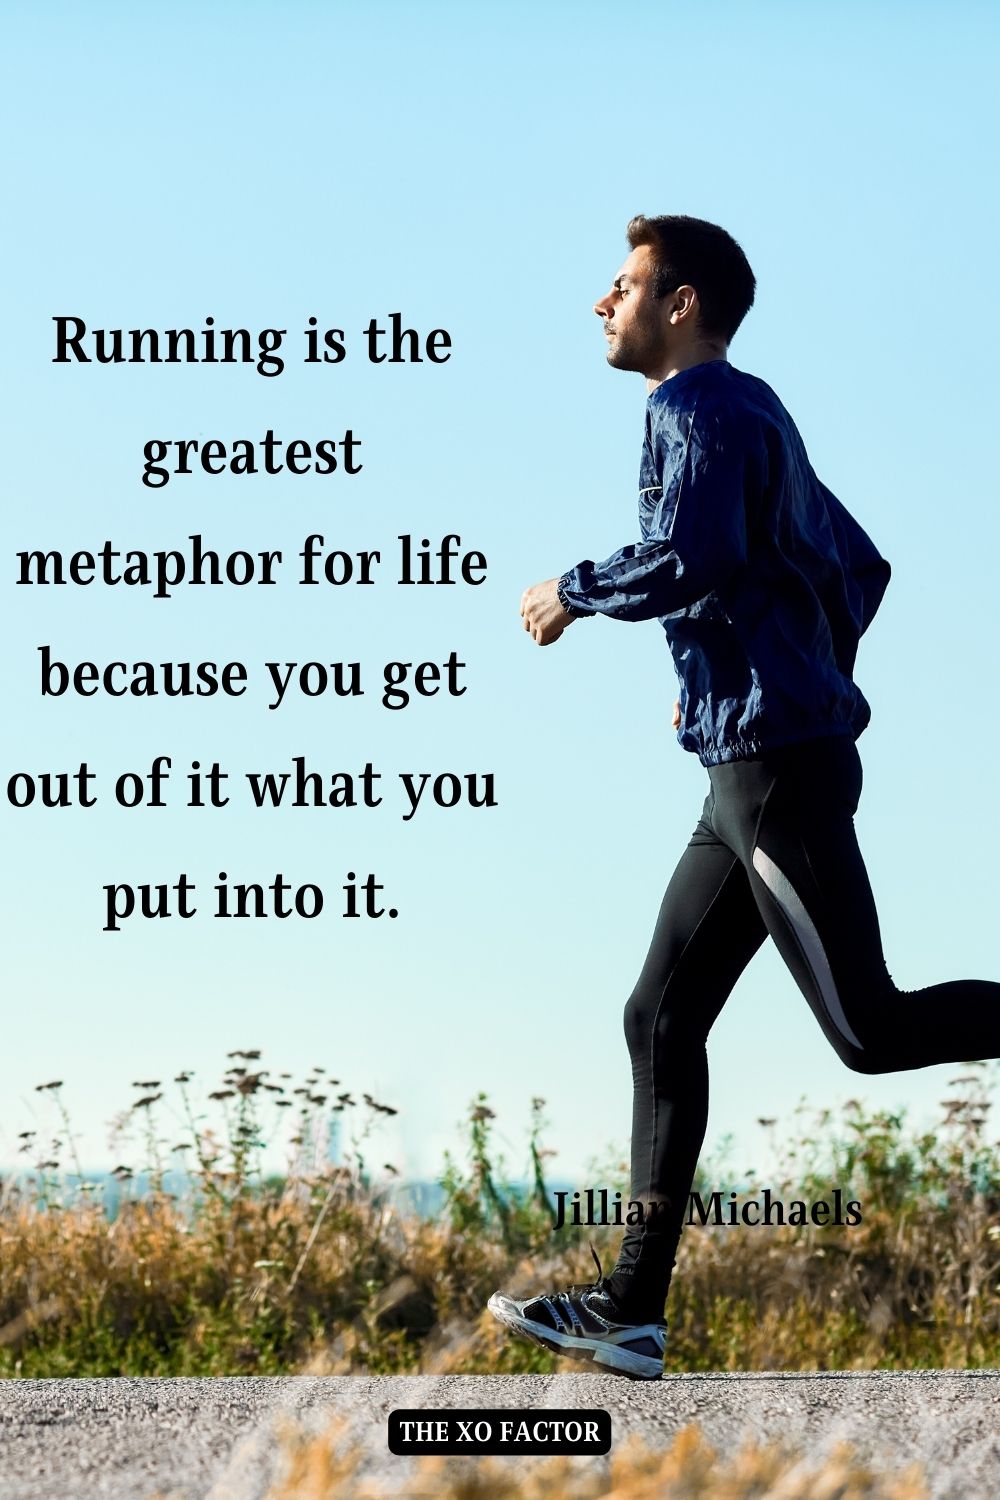 Running is the greatest metaphor for life because you get out of it what you put into it.